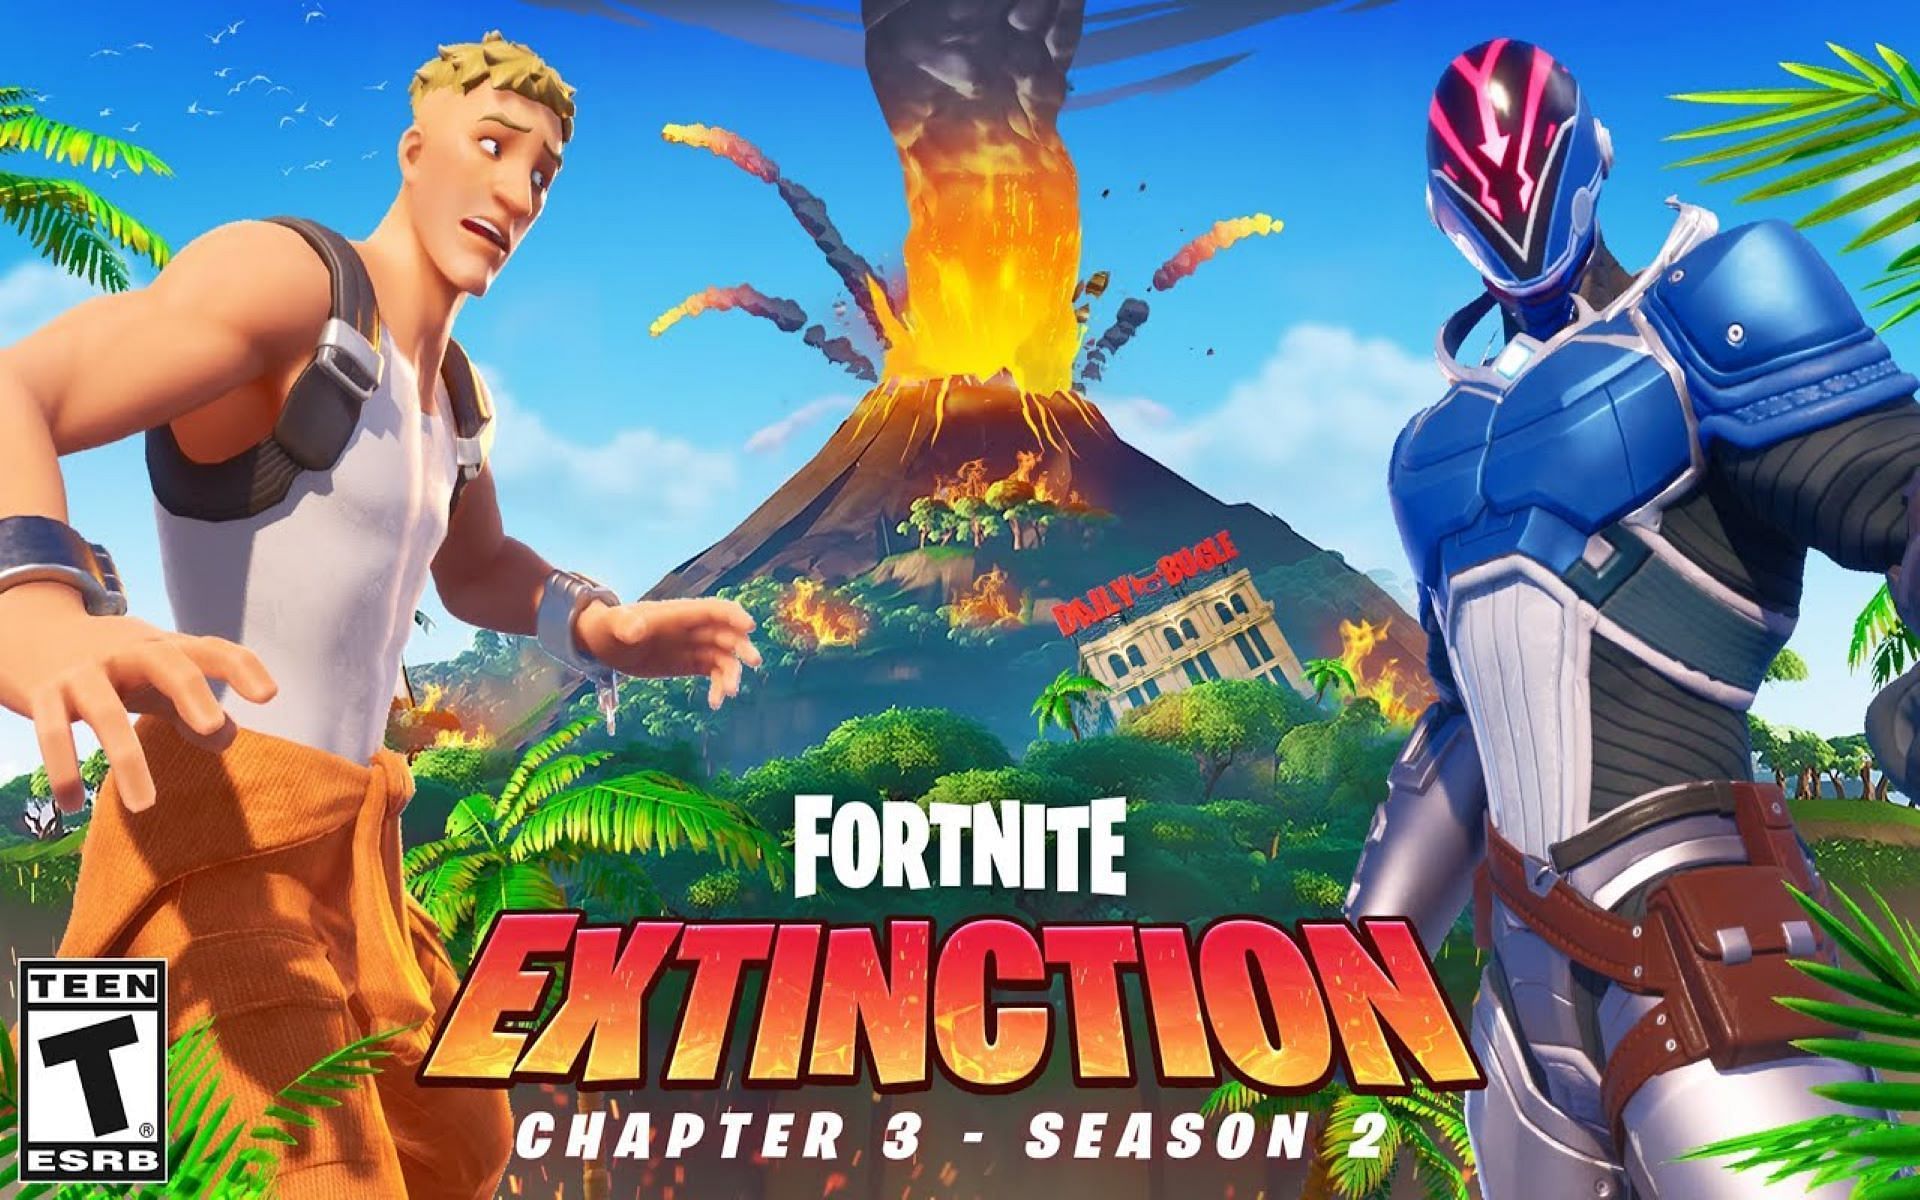 Fortnite theories that may come true the next season (image via Top5gaming/YouTube)